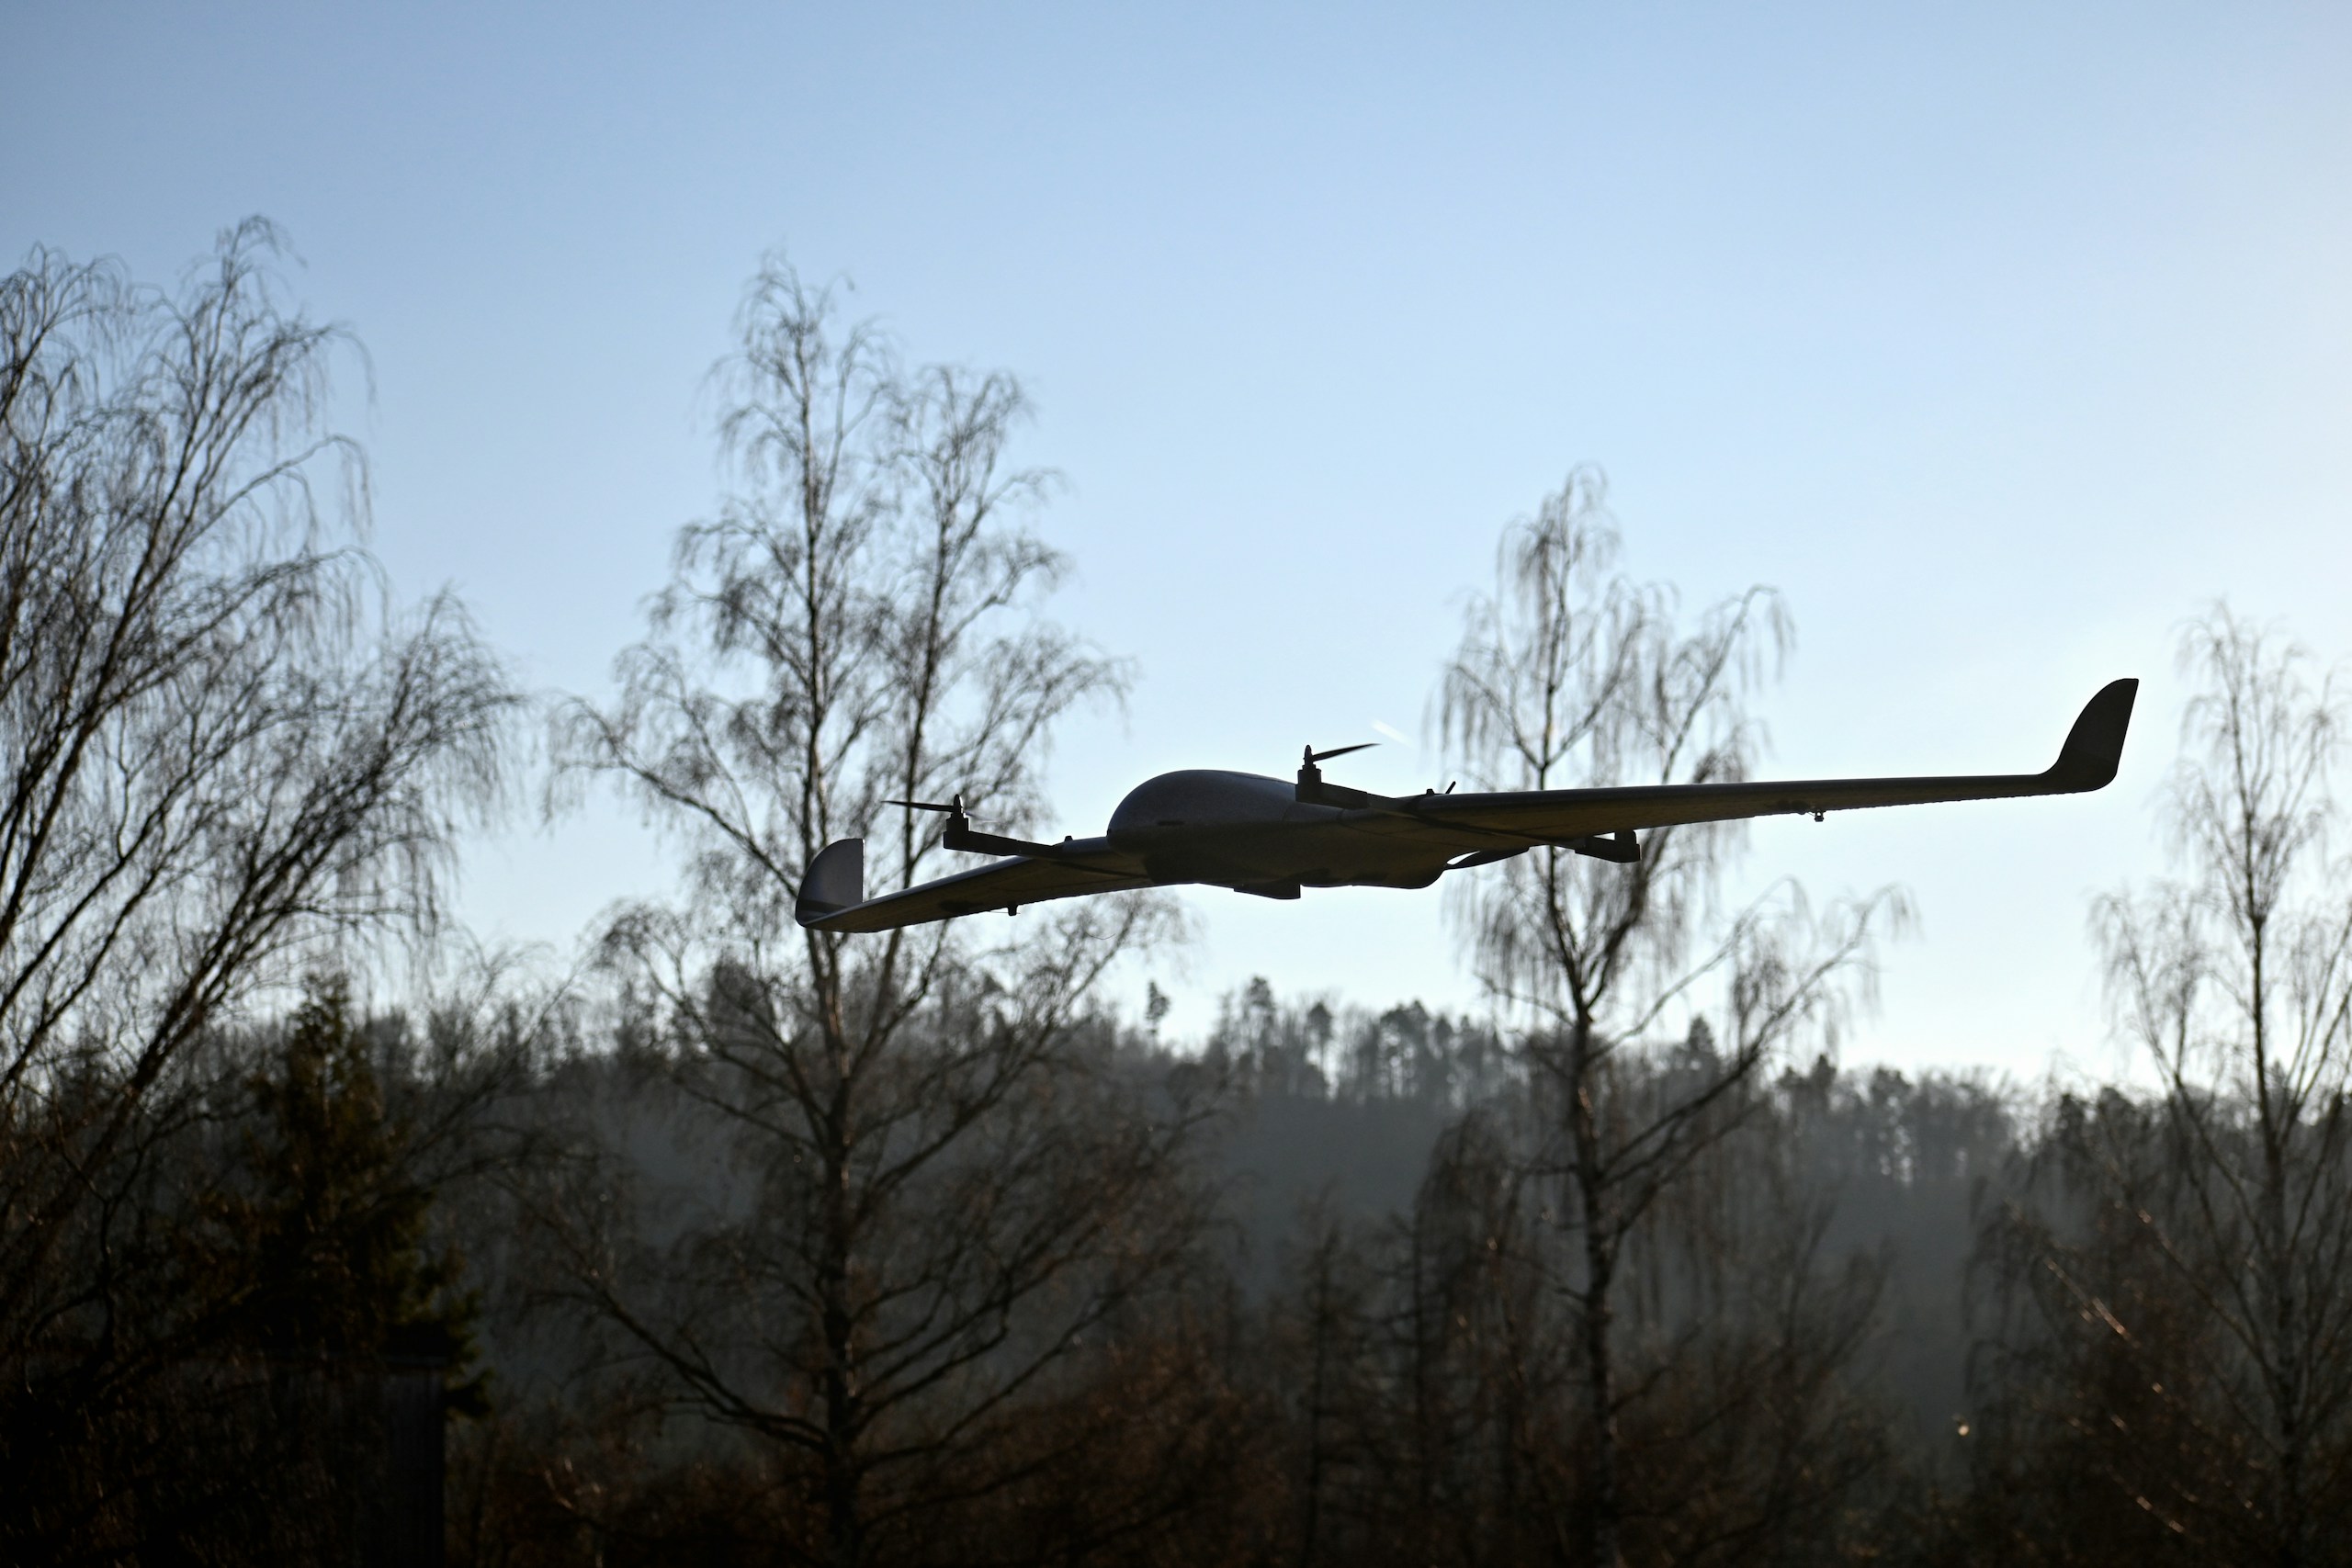 A DeltaQuad Pro VTOL UAV #map drone flying in front of four birch trees.